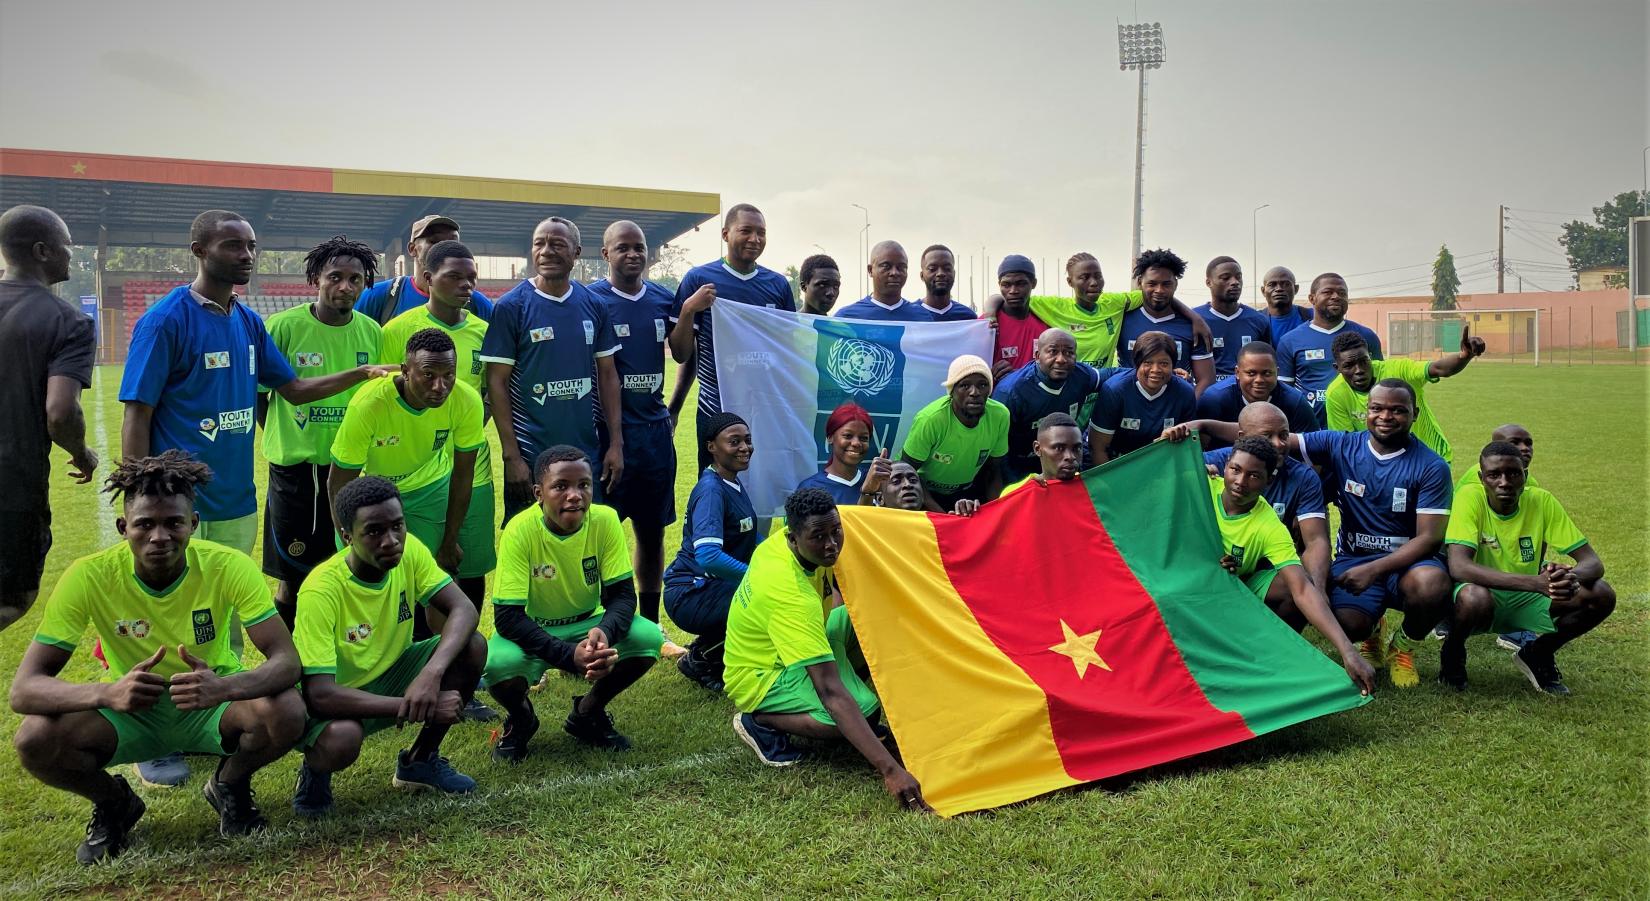 A cross-section of gender-inclusive football teams, at the start of the friendly match between the street youths and staff of UNDP  